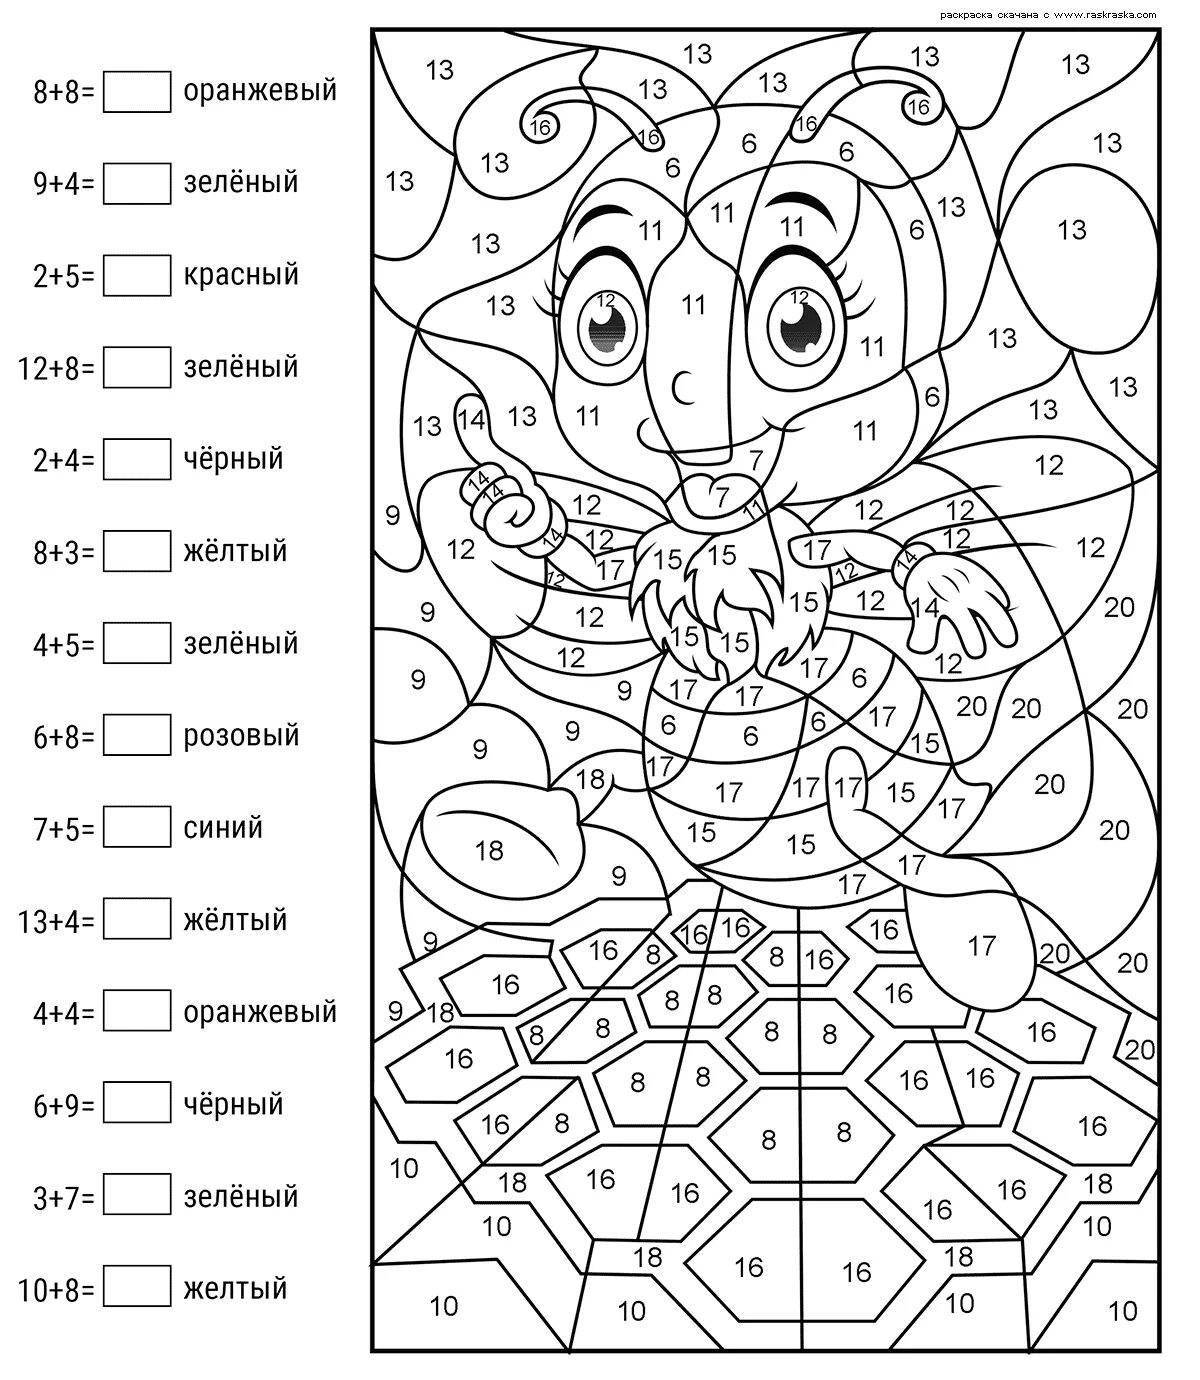 Coloring pages colorful-delight from 1 to 100